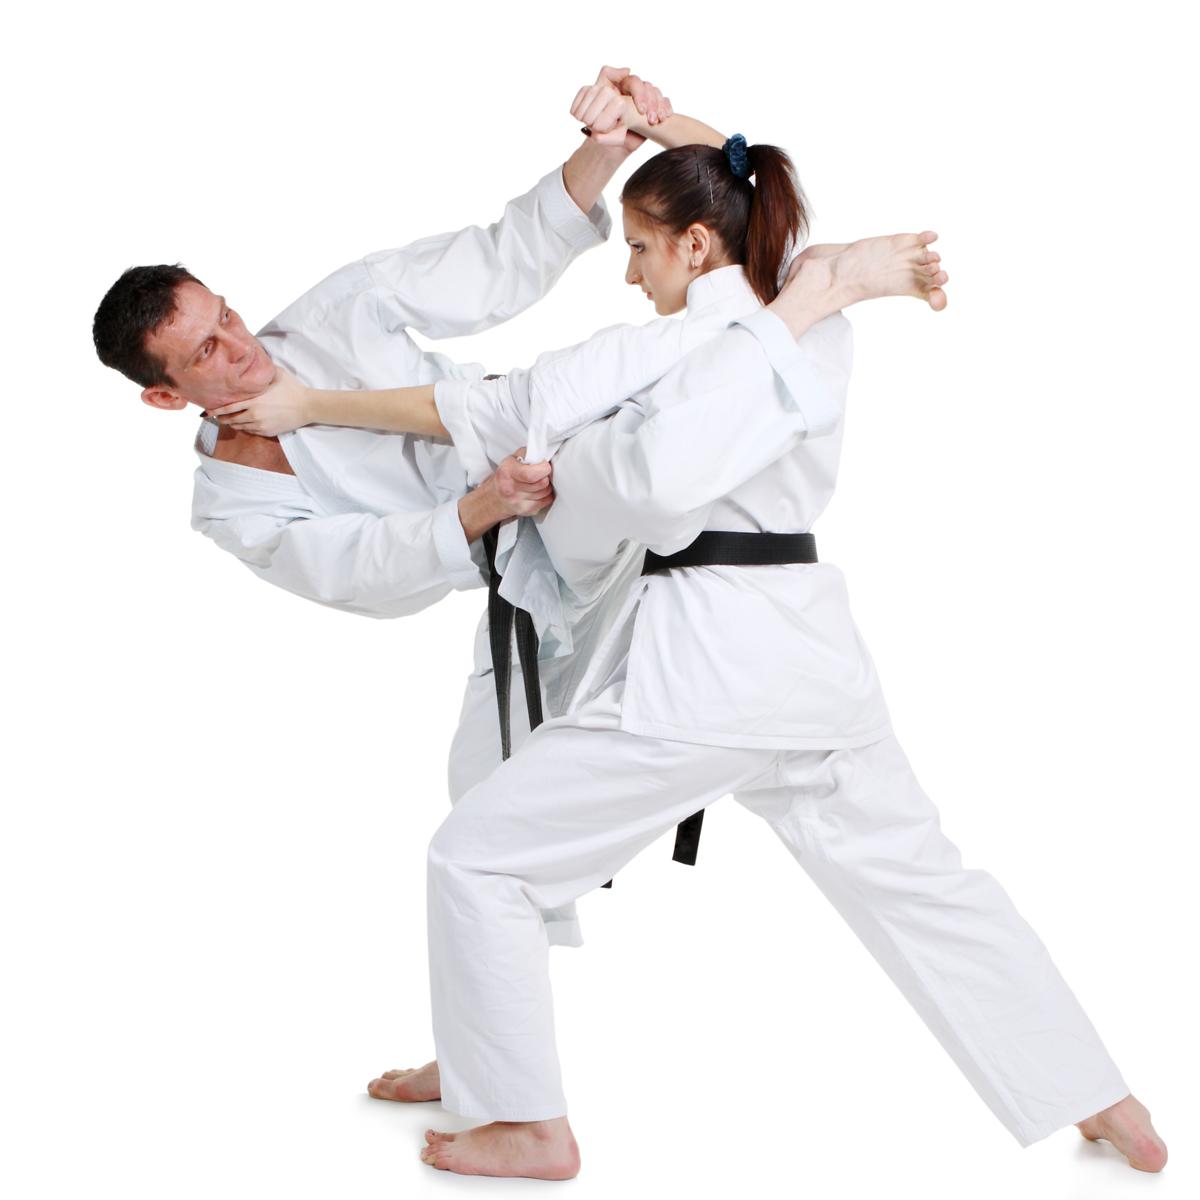 Karate Moves A Guide To The Basic Blocks Strikes And Kicks Sports Aspire